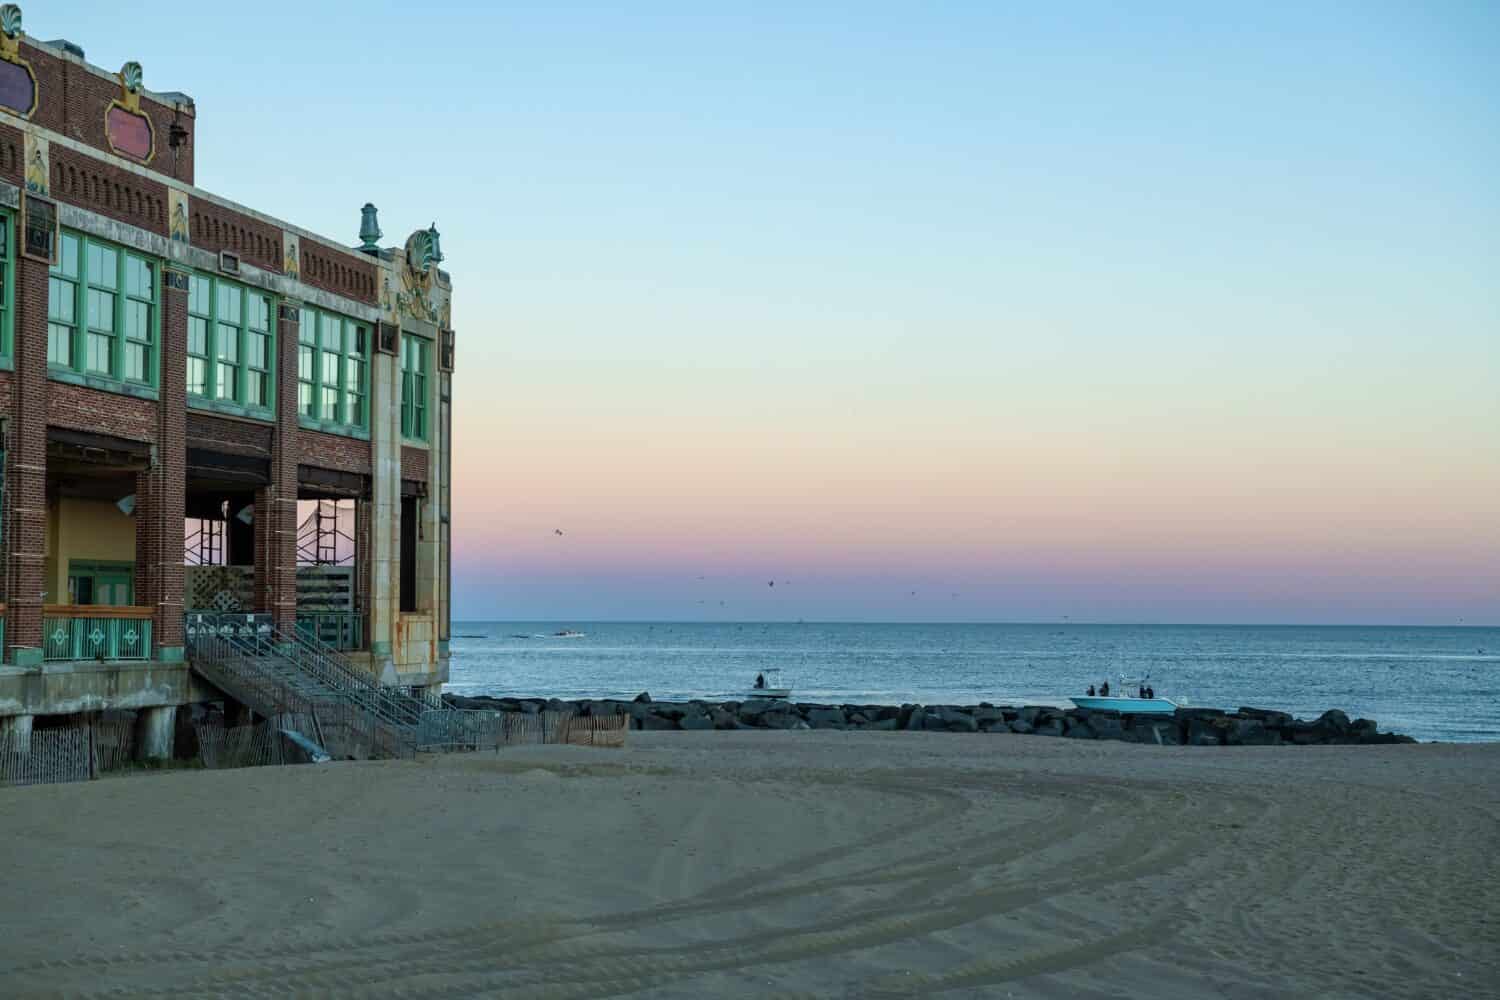 The historic Convention hall at dusk in Asbury Park New Jersey.